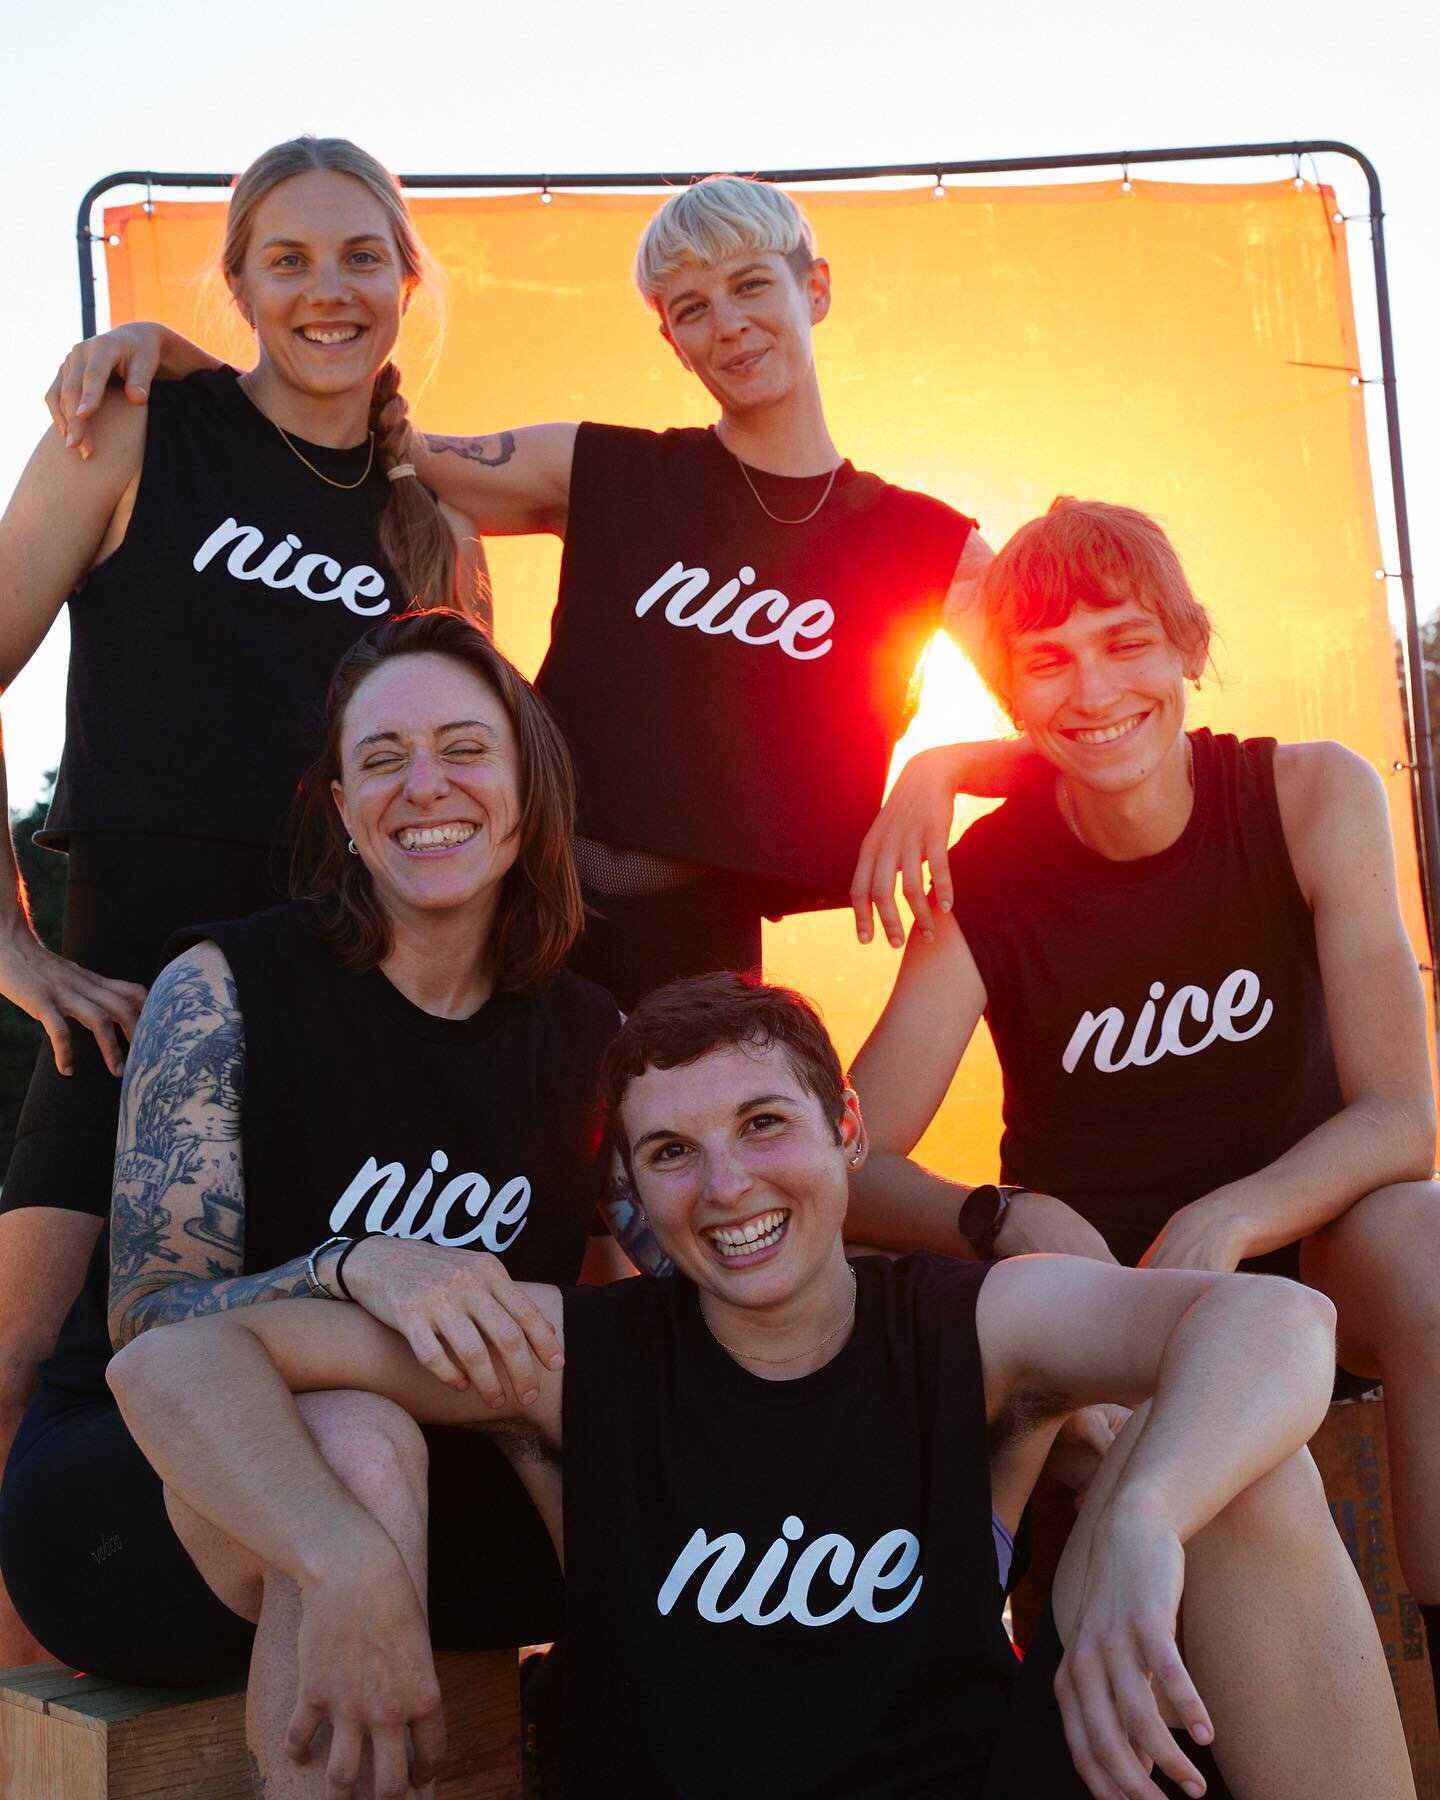 Introducing the Nice Bikes Cyclocross Team from our &ldquo;Comminity&rdquo; series, with words and images by @dominiquepowers:

The @nicebikes team is a nonprofit UCI cycling team, whose intention is to create opportunities for women and non-binary a